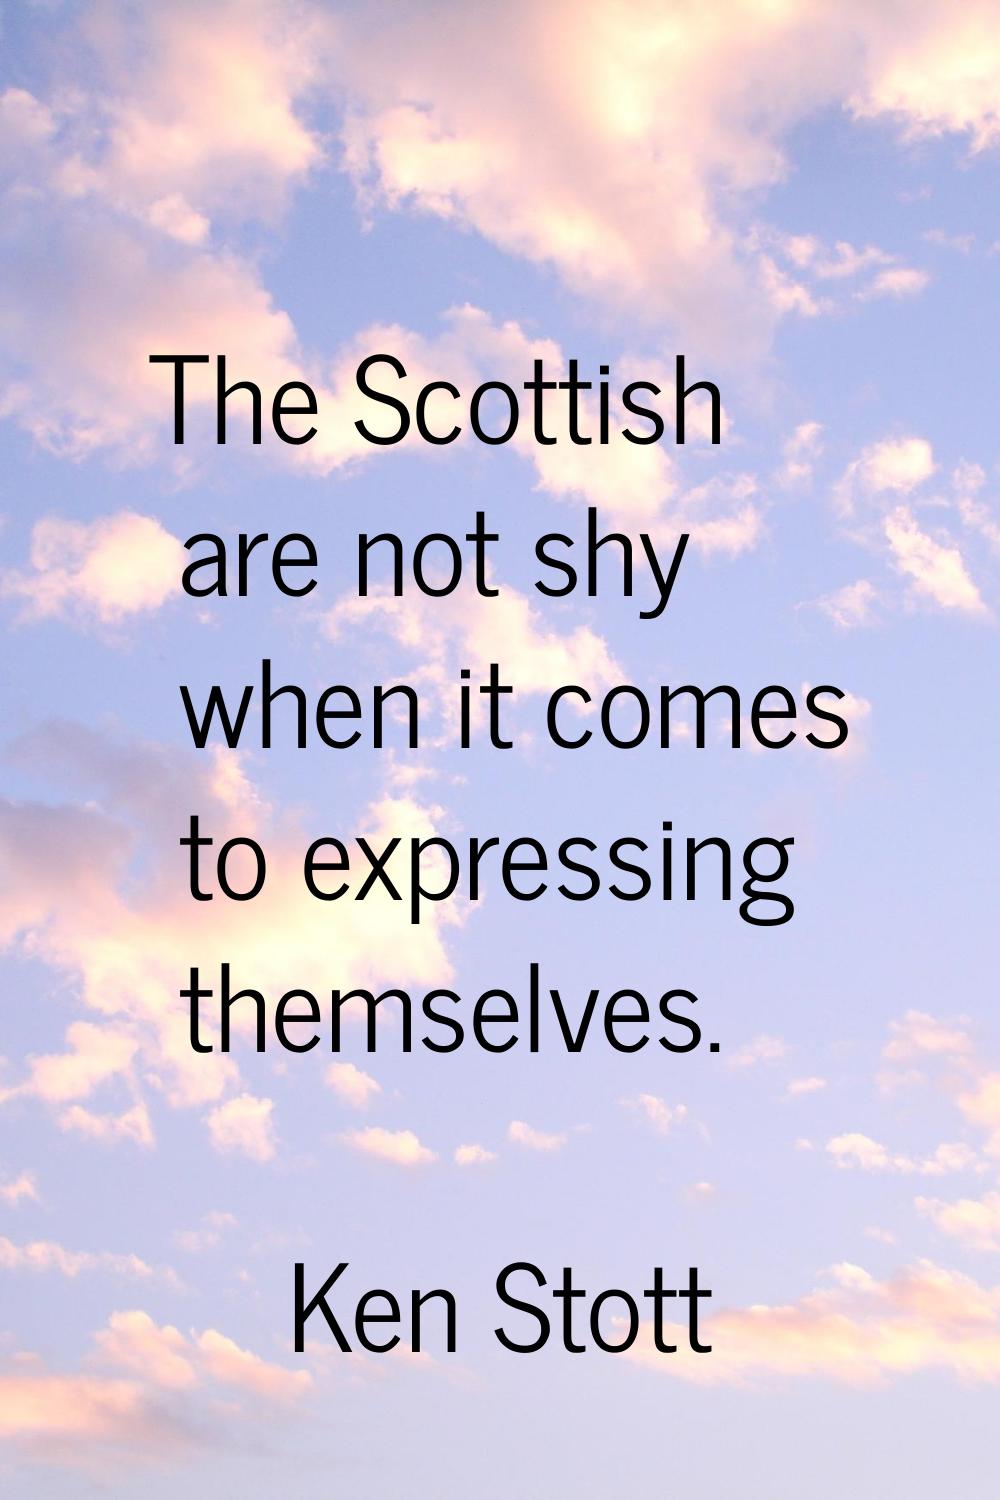 The Scottish are not shy when it comes to expressing themselves.